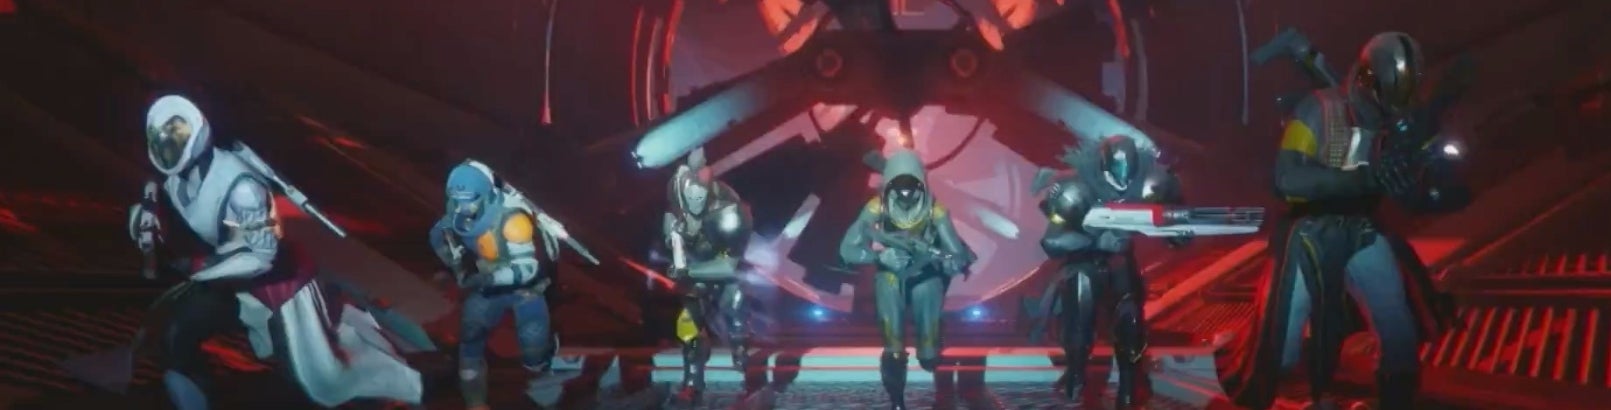 Image for Destiny 2's launch week uproar shows why developers need to talk about money